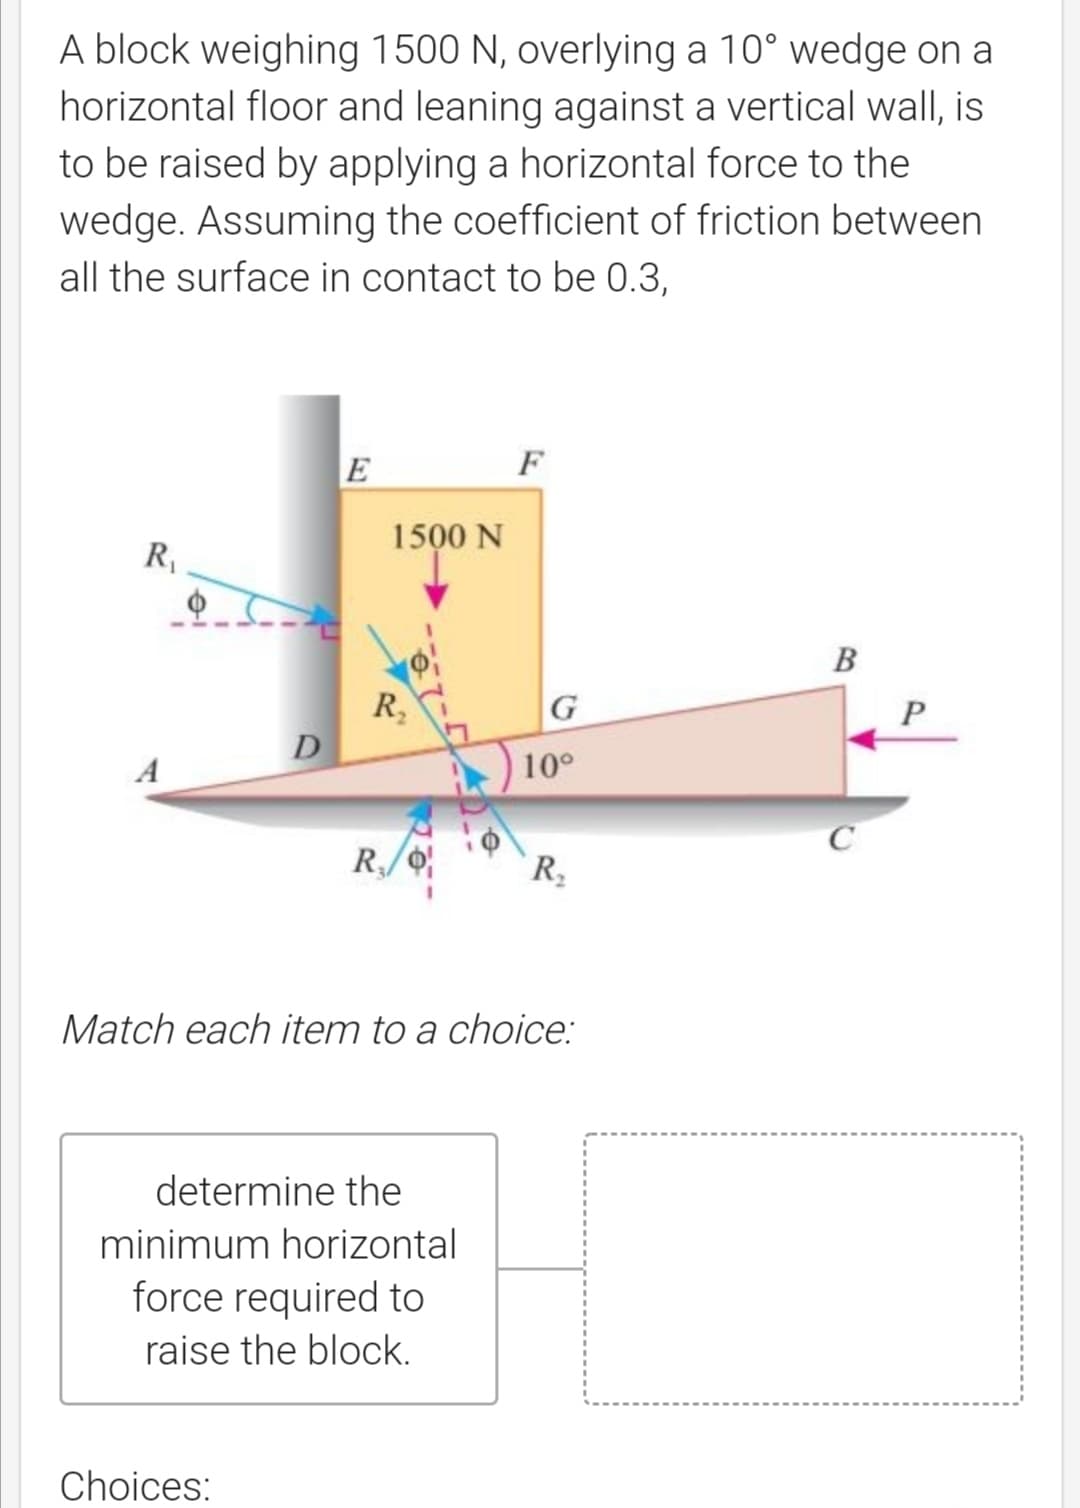 A block weighing 1500 N, overlying a 10° wedge on a
horizontal floor and leaning against a vertical wall, is
to be raised by applying a horizontal force to the
wedge. Assuming the coefficient of friction between
all the surface in contact to be 0.3,
E
F
1500 N
R,
B
R,
D
A
10°
C
Match each item to a choice:
determine the
minimum horizontal
force required to
raise the block.
Choices:
